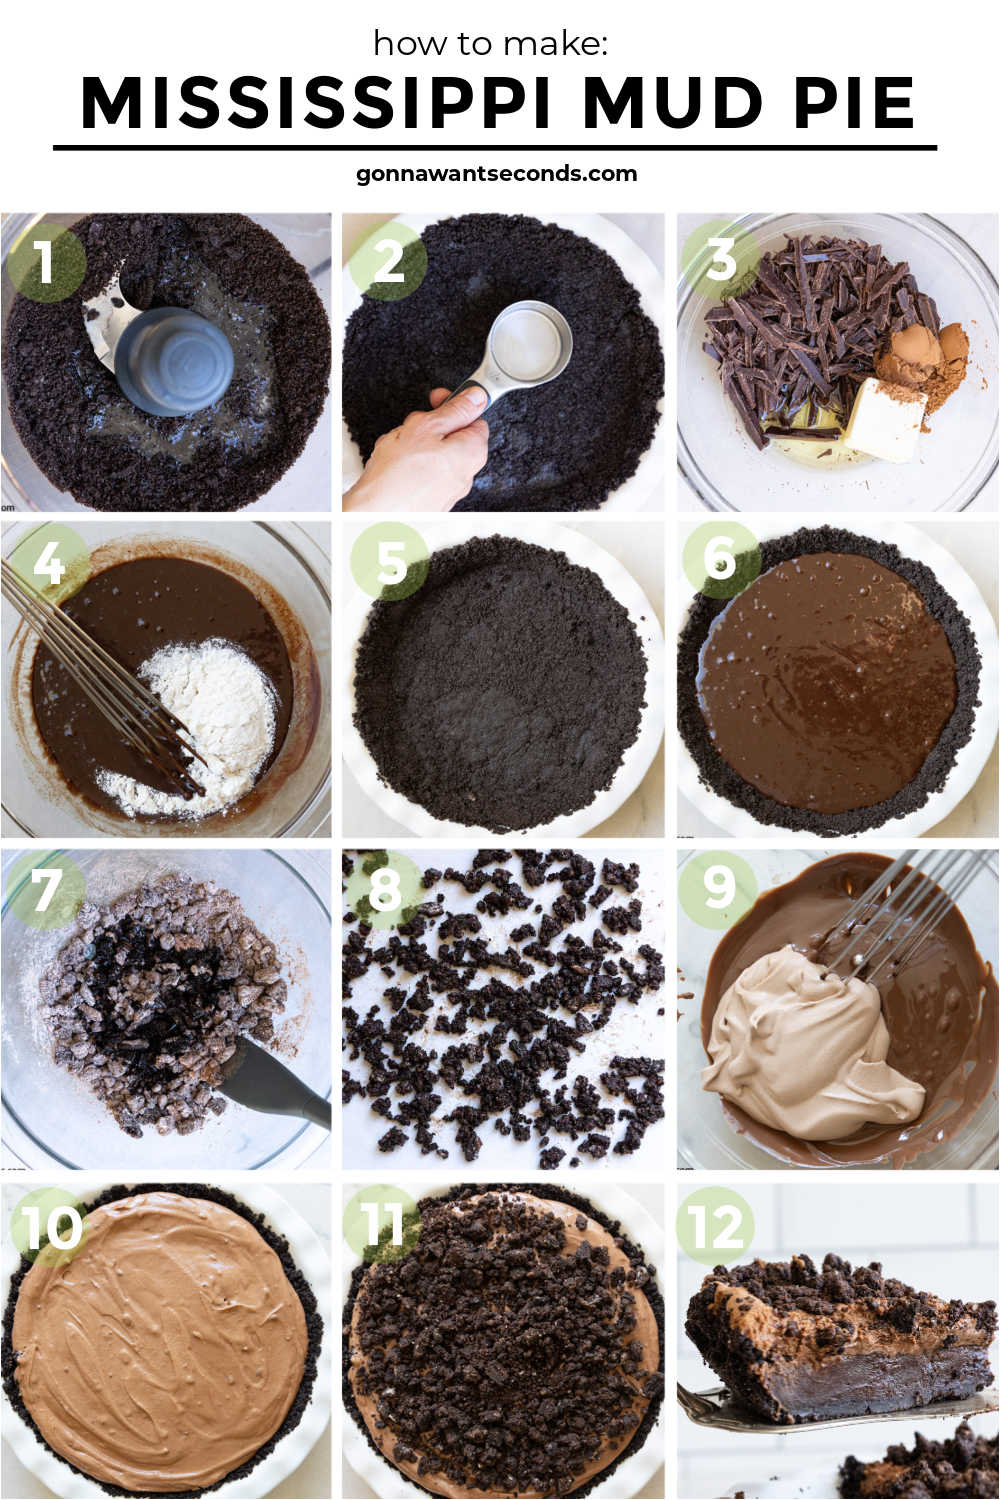 Step by step how to make Mississippi mud pie